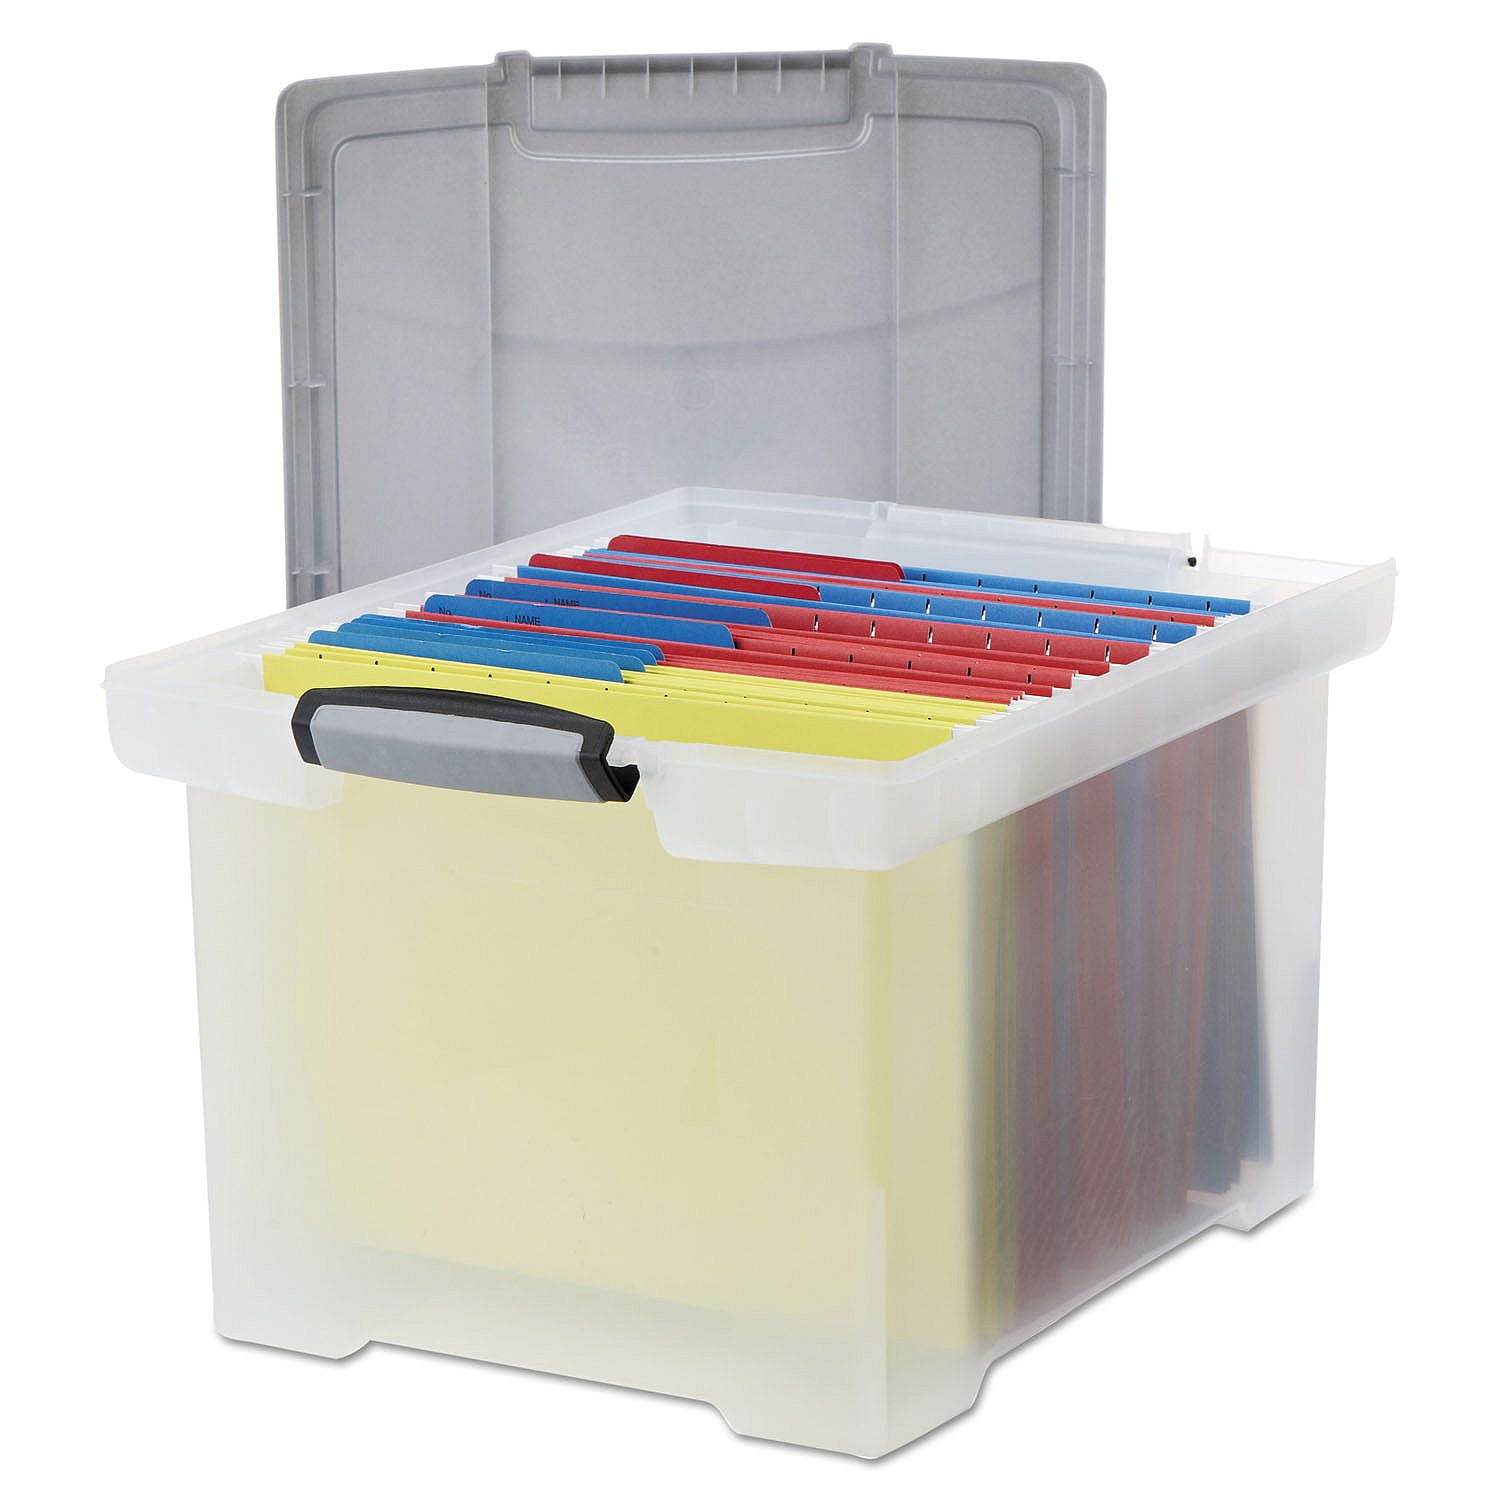 17.13 x 9.63 x 11 Inches, Storex Portable File Box with Organizer Lid 